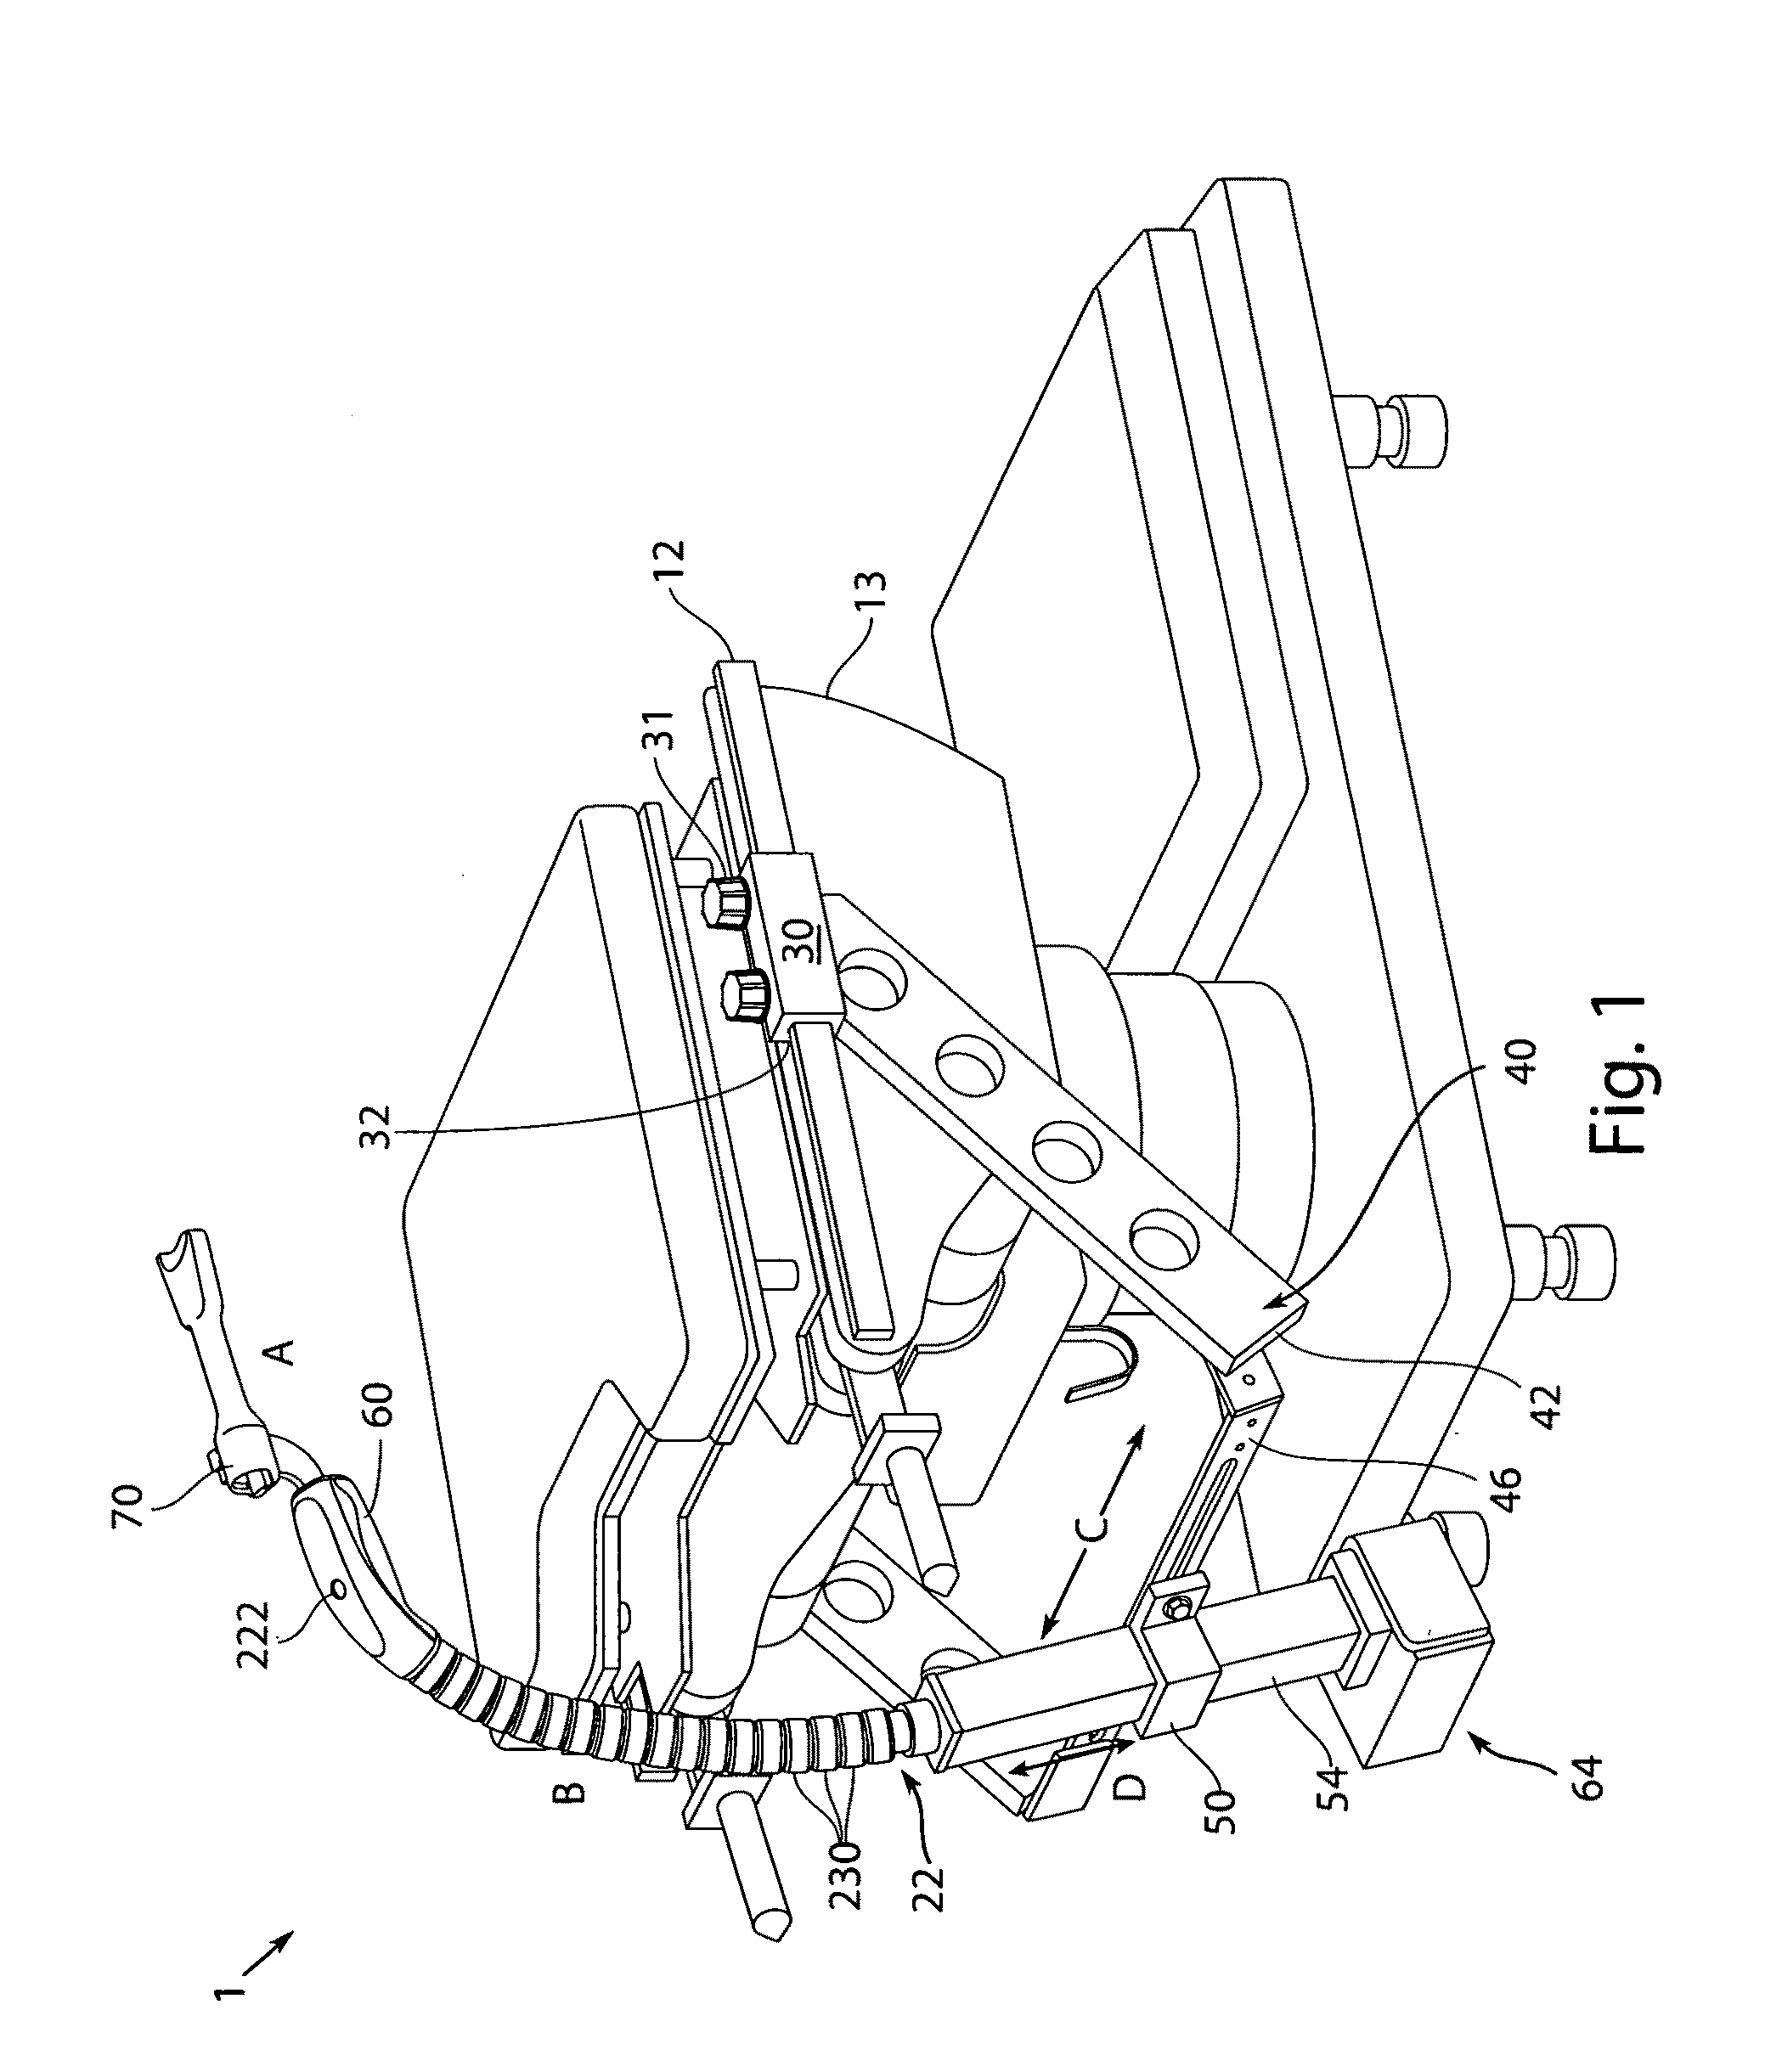 Table-mounted surgical instrument stabilizers with single-handed or voice activated maneuverability